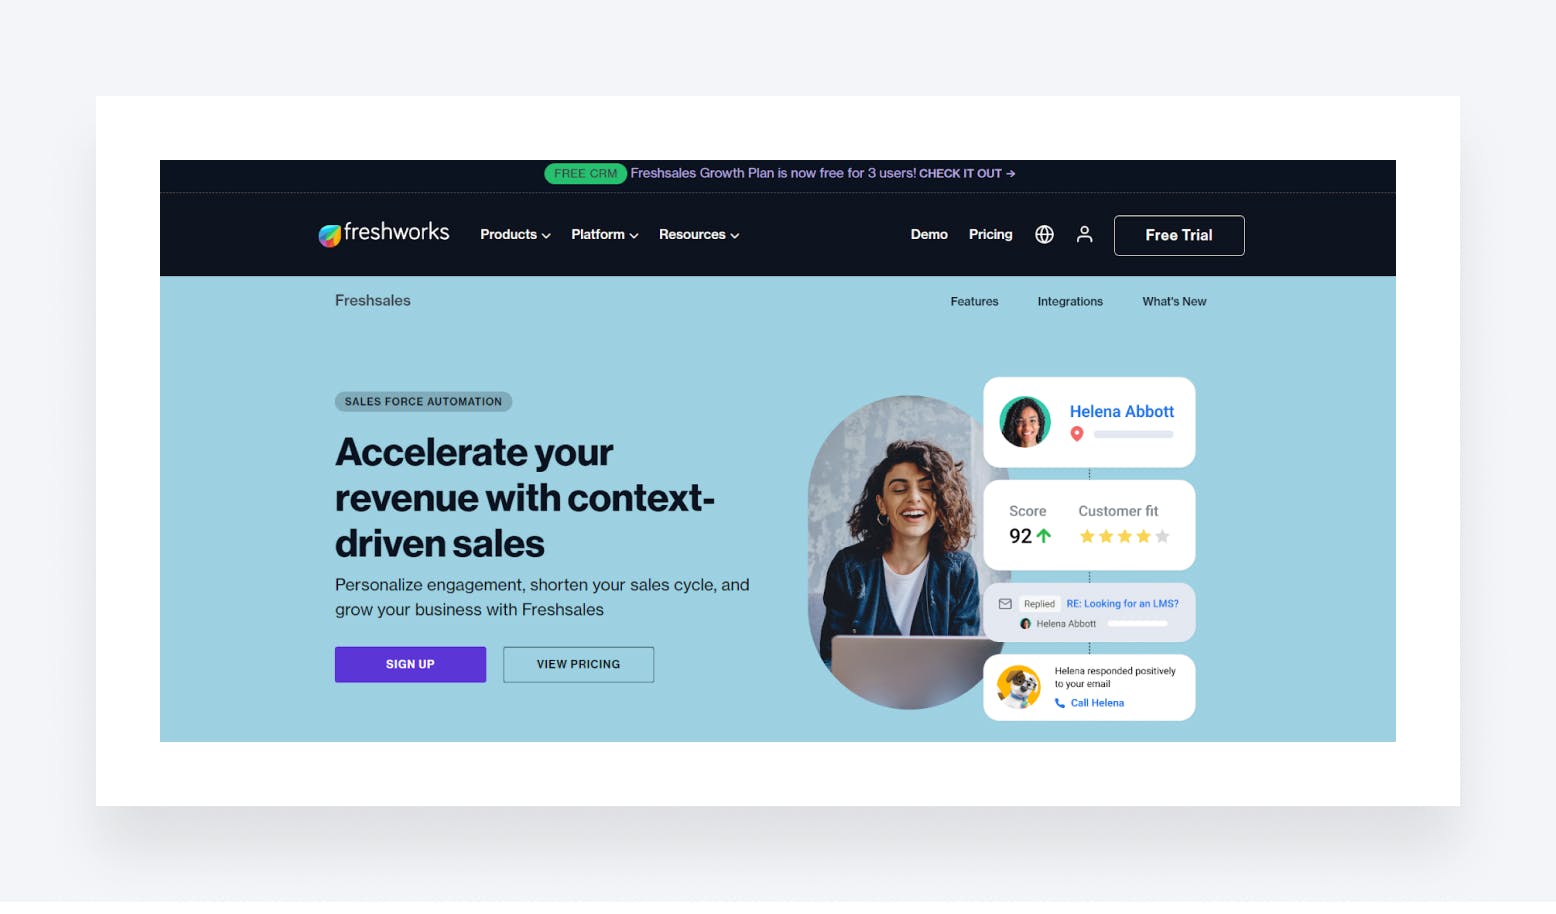 Freshsales’ CRM page